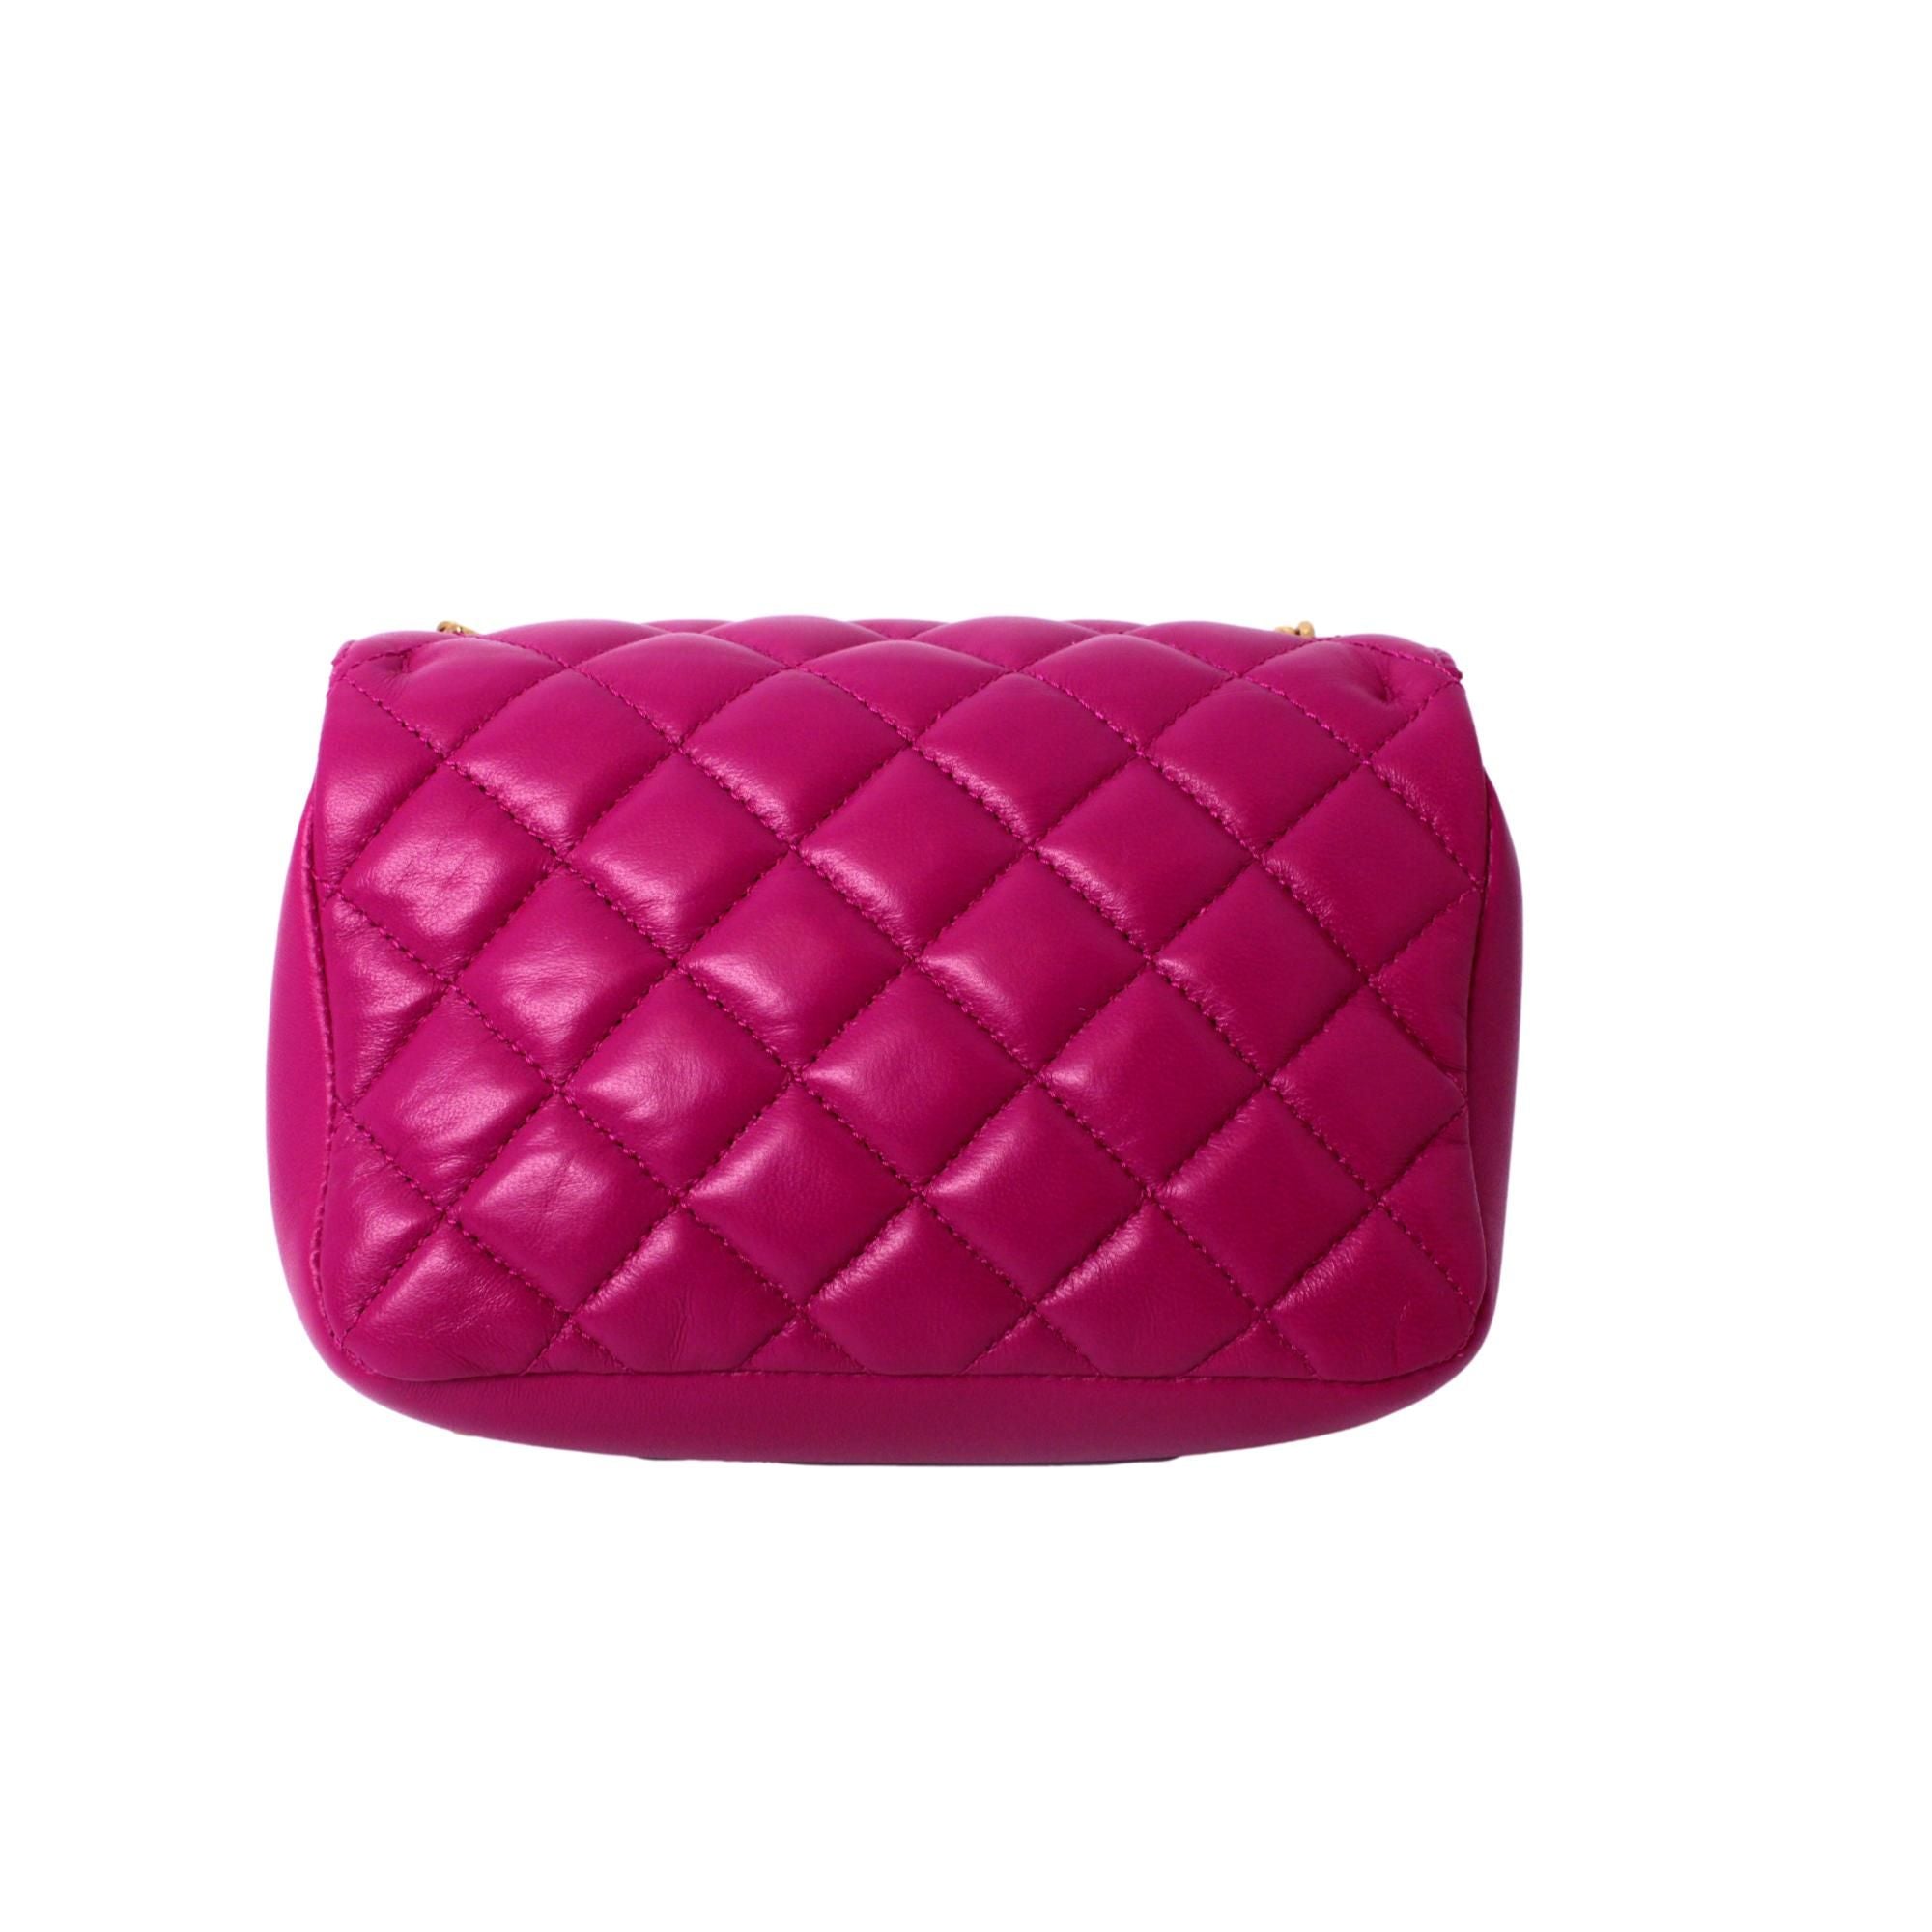 Versace La Medusa Quilted Orchid Pink Lambskin Leather Crossbody Shoulder Bag at_Queen_Bee_of_Beverly_Hills